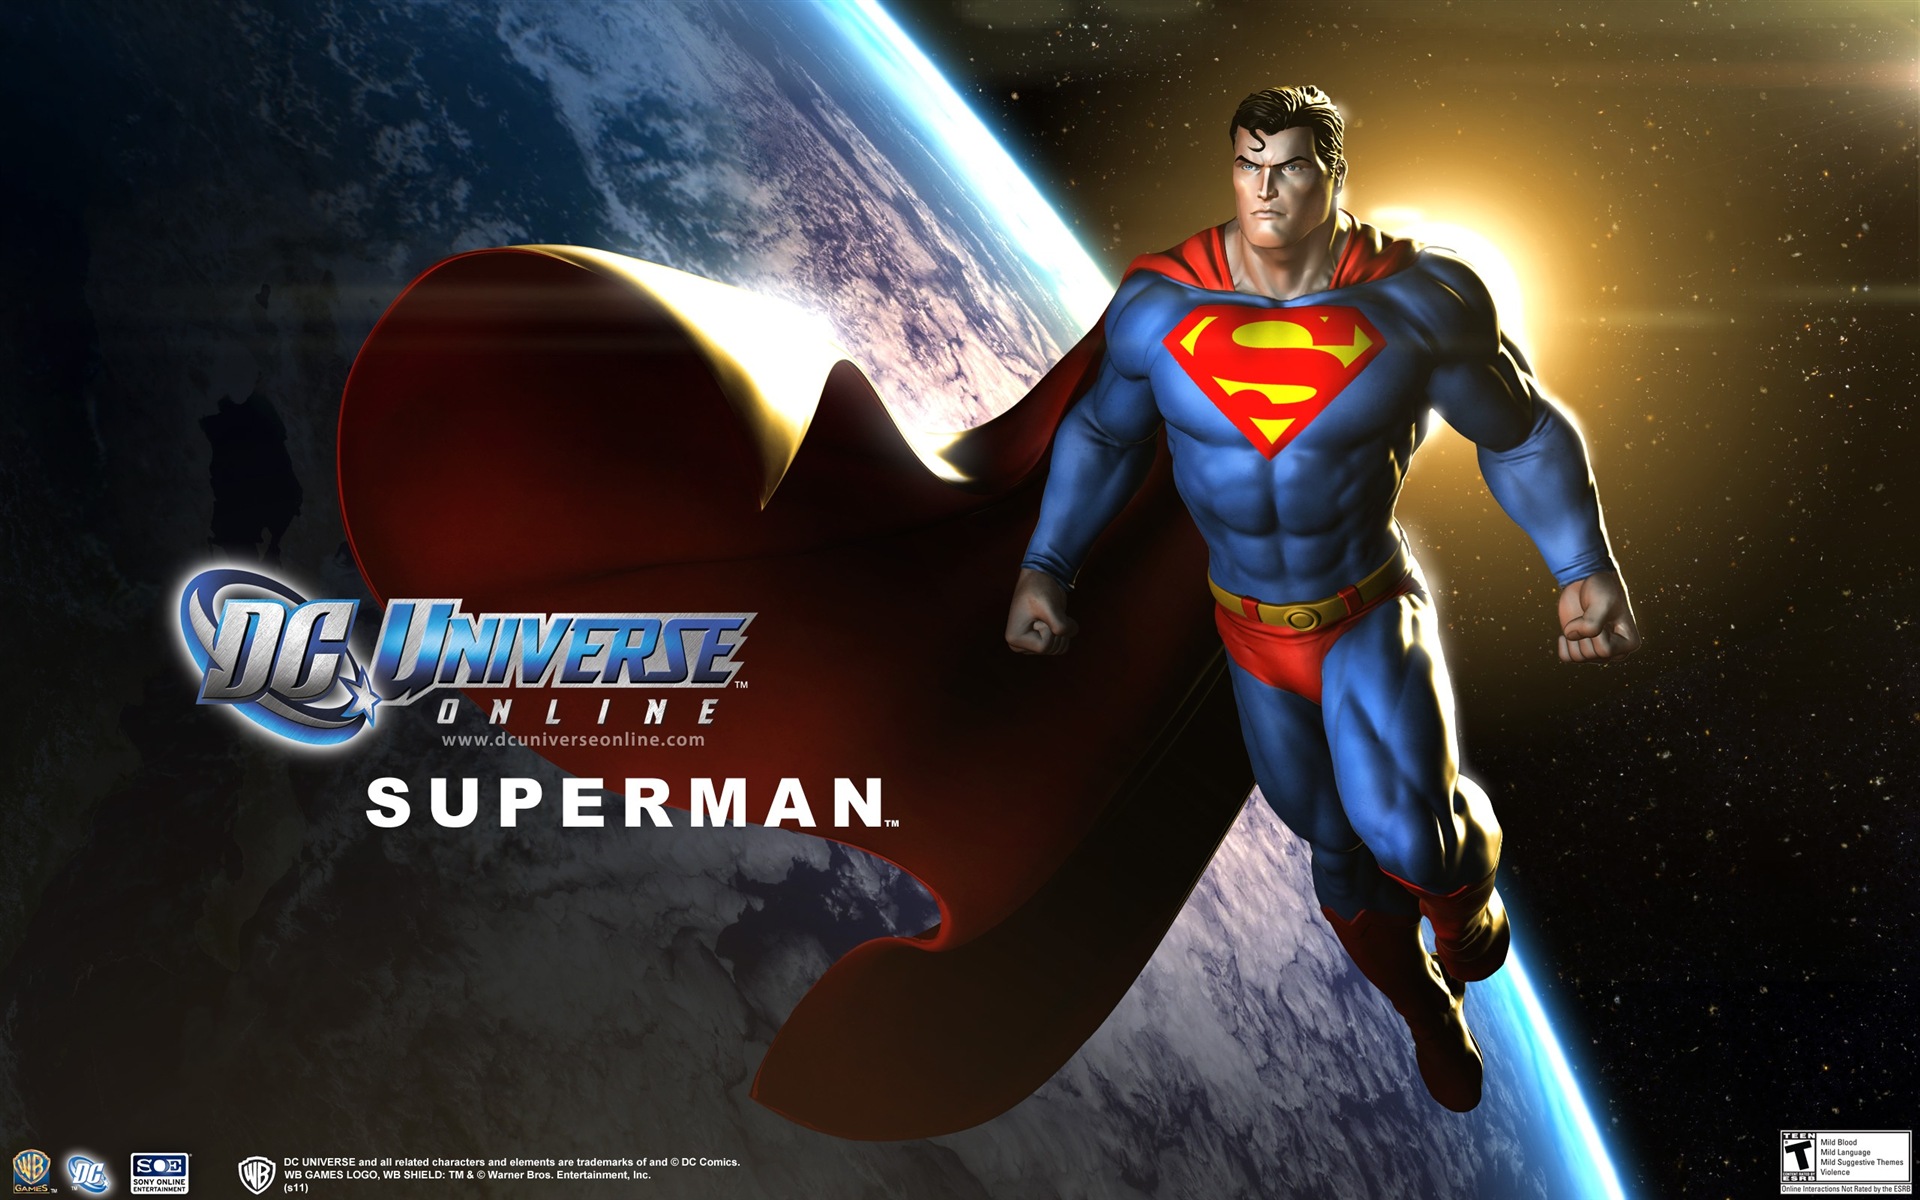 DC Universe Online HD game wallpapers #9 - 1920x1200